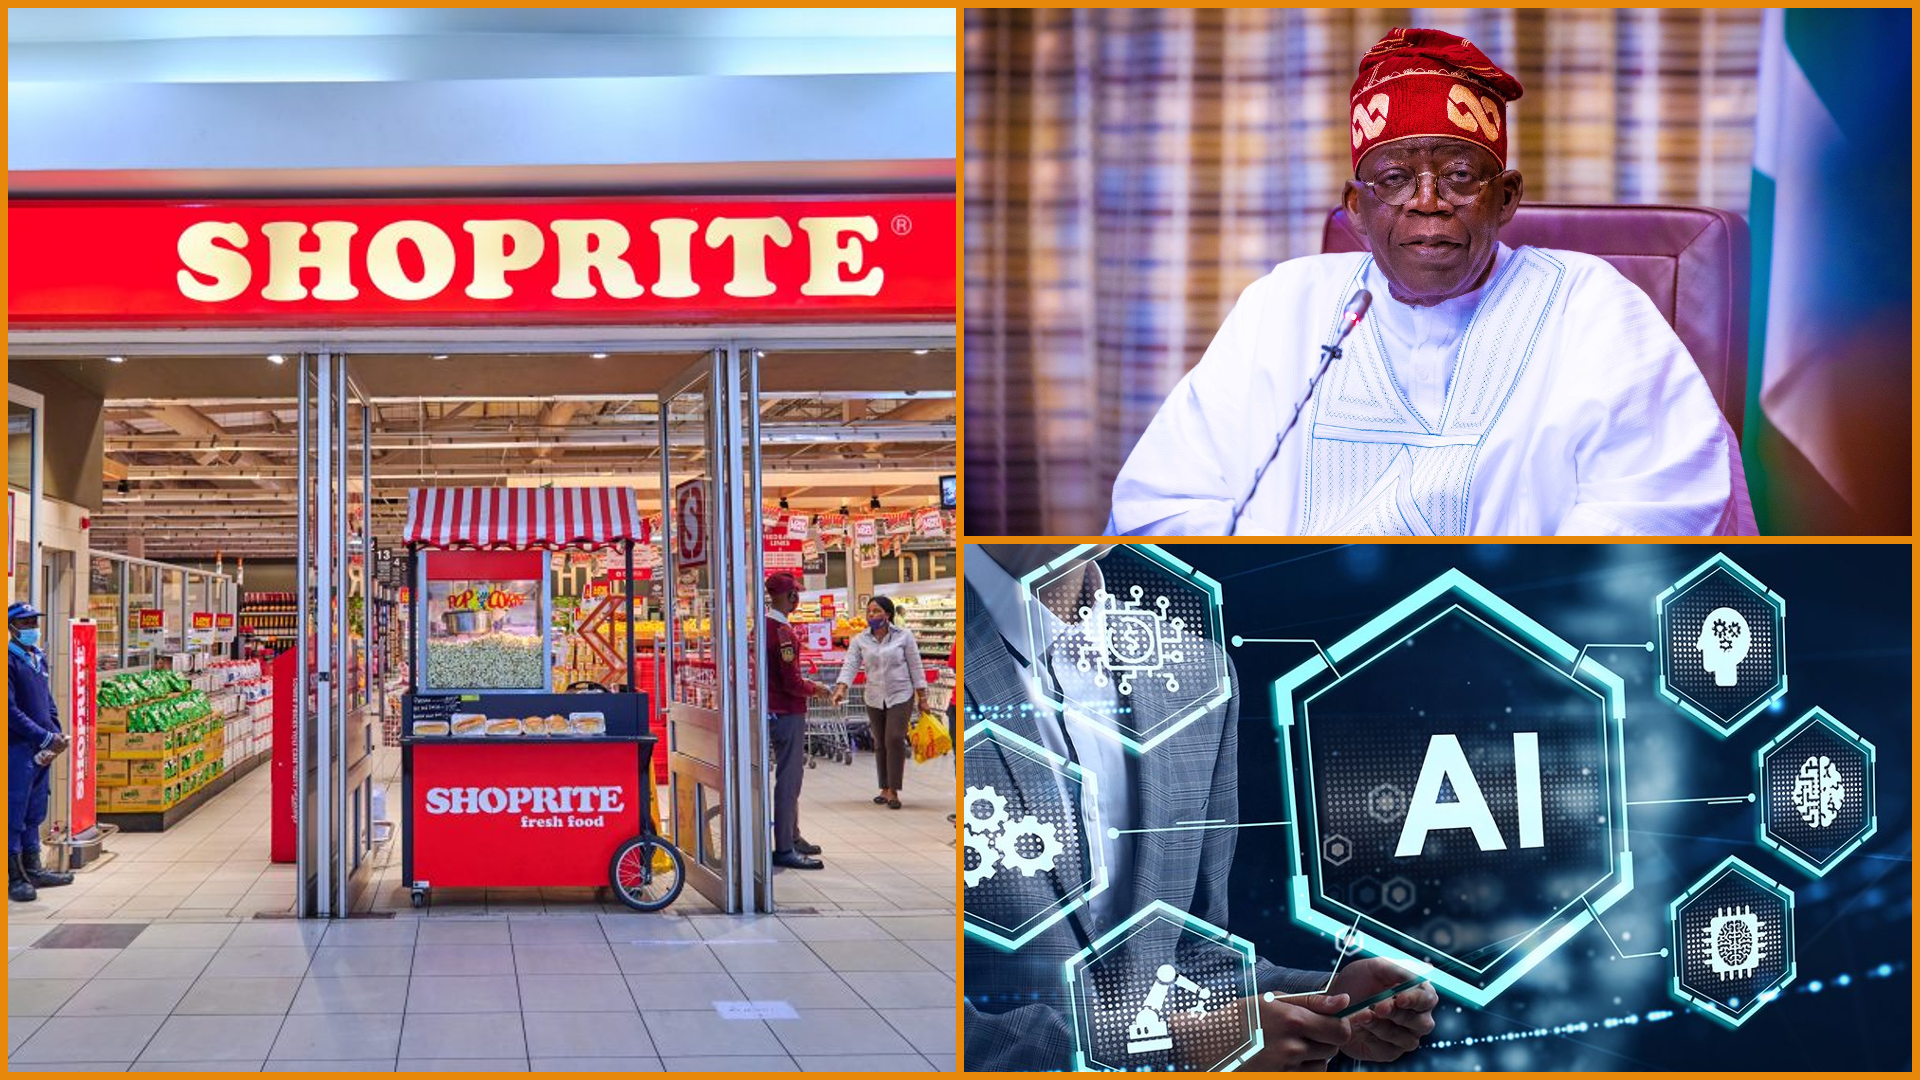 Some of the issues in the news today include Shoprite closing Abuja branch and oil operators seeking Federal Government's intervention.